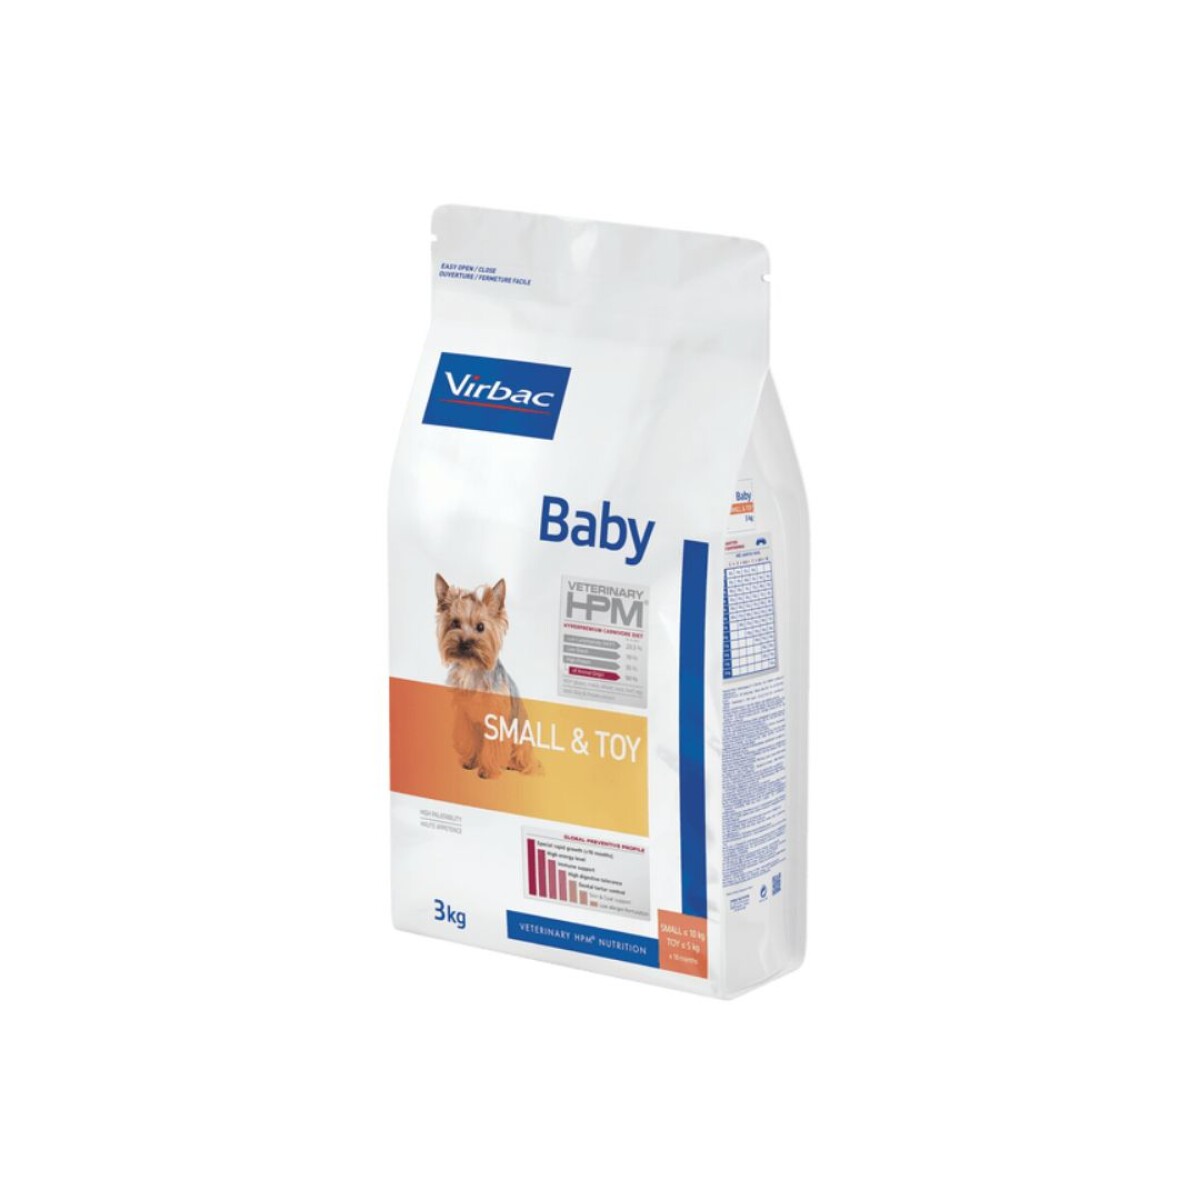 VIRBAC DOG BABY SMALL & TOY 1,5KG - Unica 